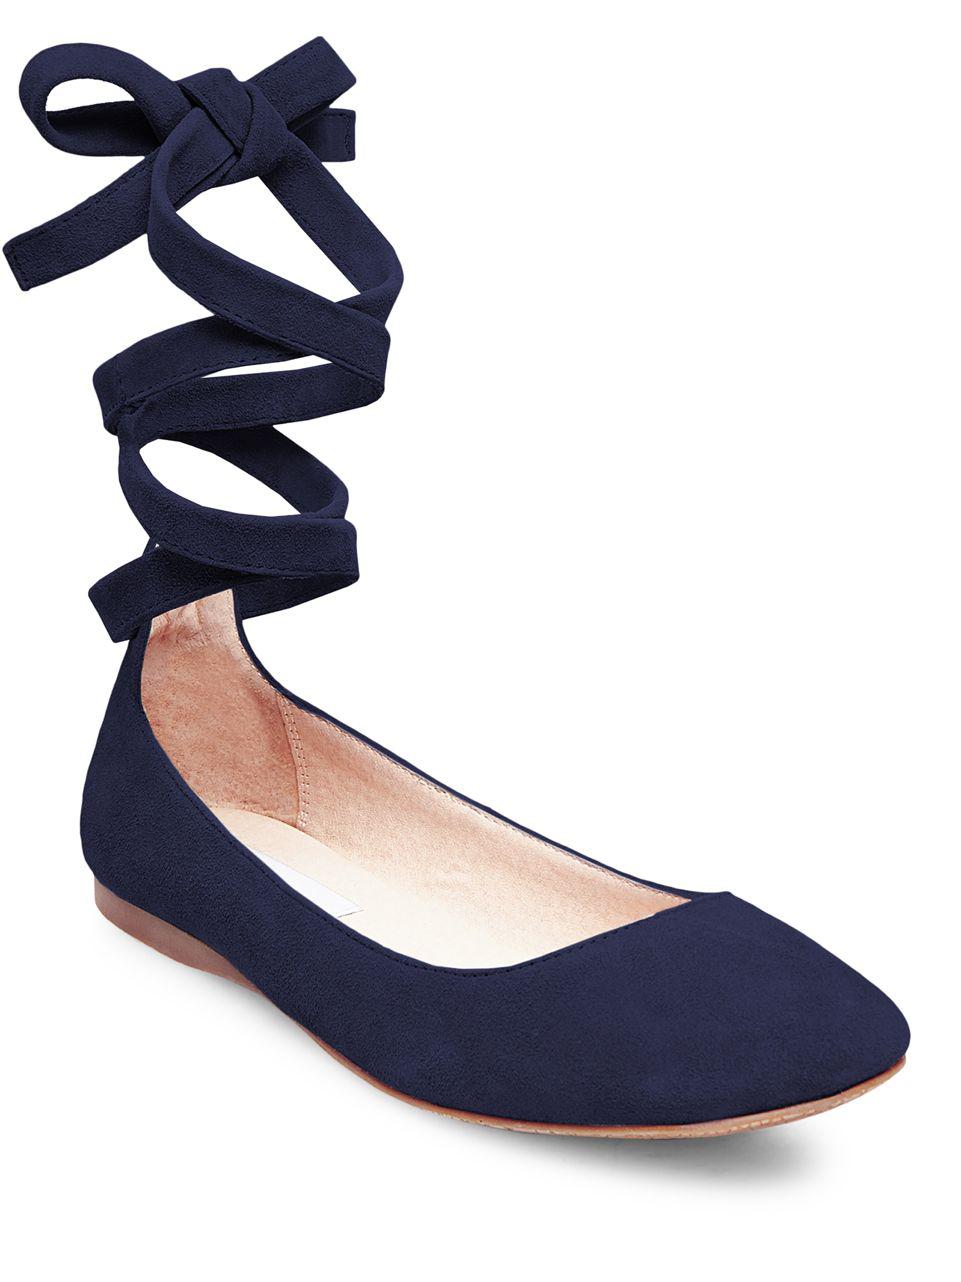 Lyst - Steve madden Bloome Suede Tie-up Ballet Flats in Blue